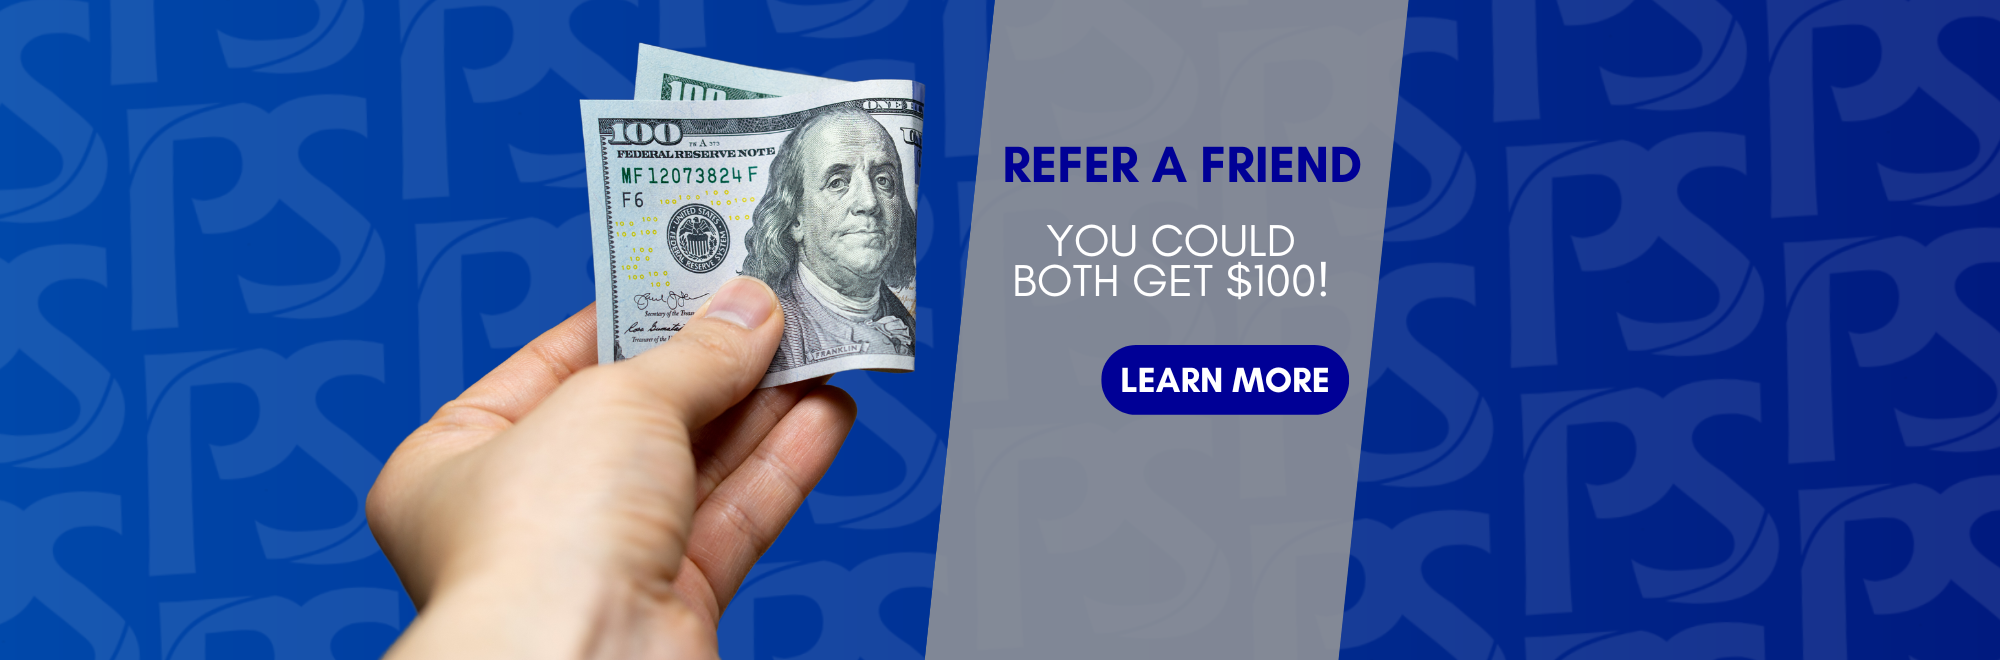 Refer a Friend, you could both earn $100.  Click to learn more.